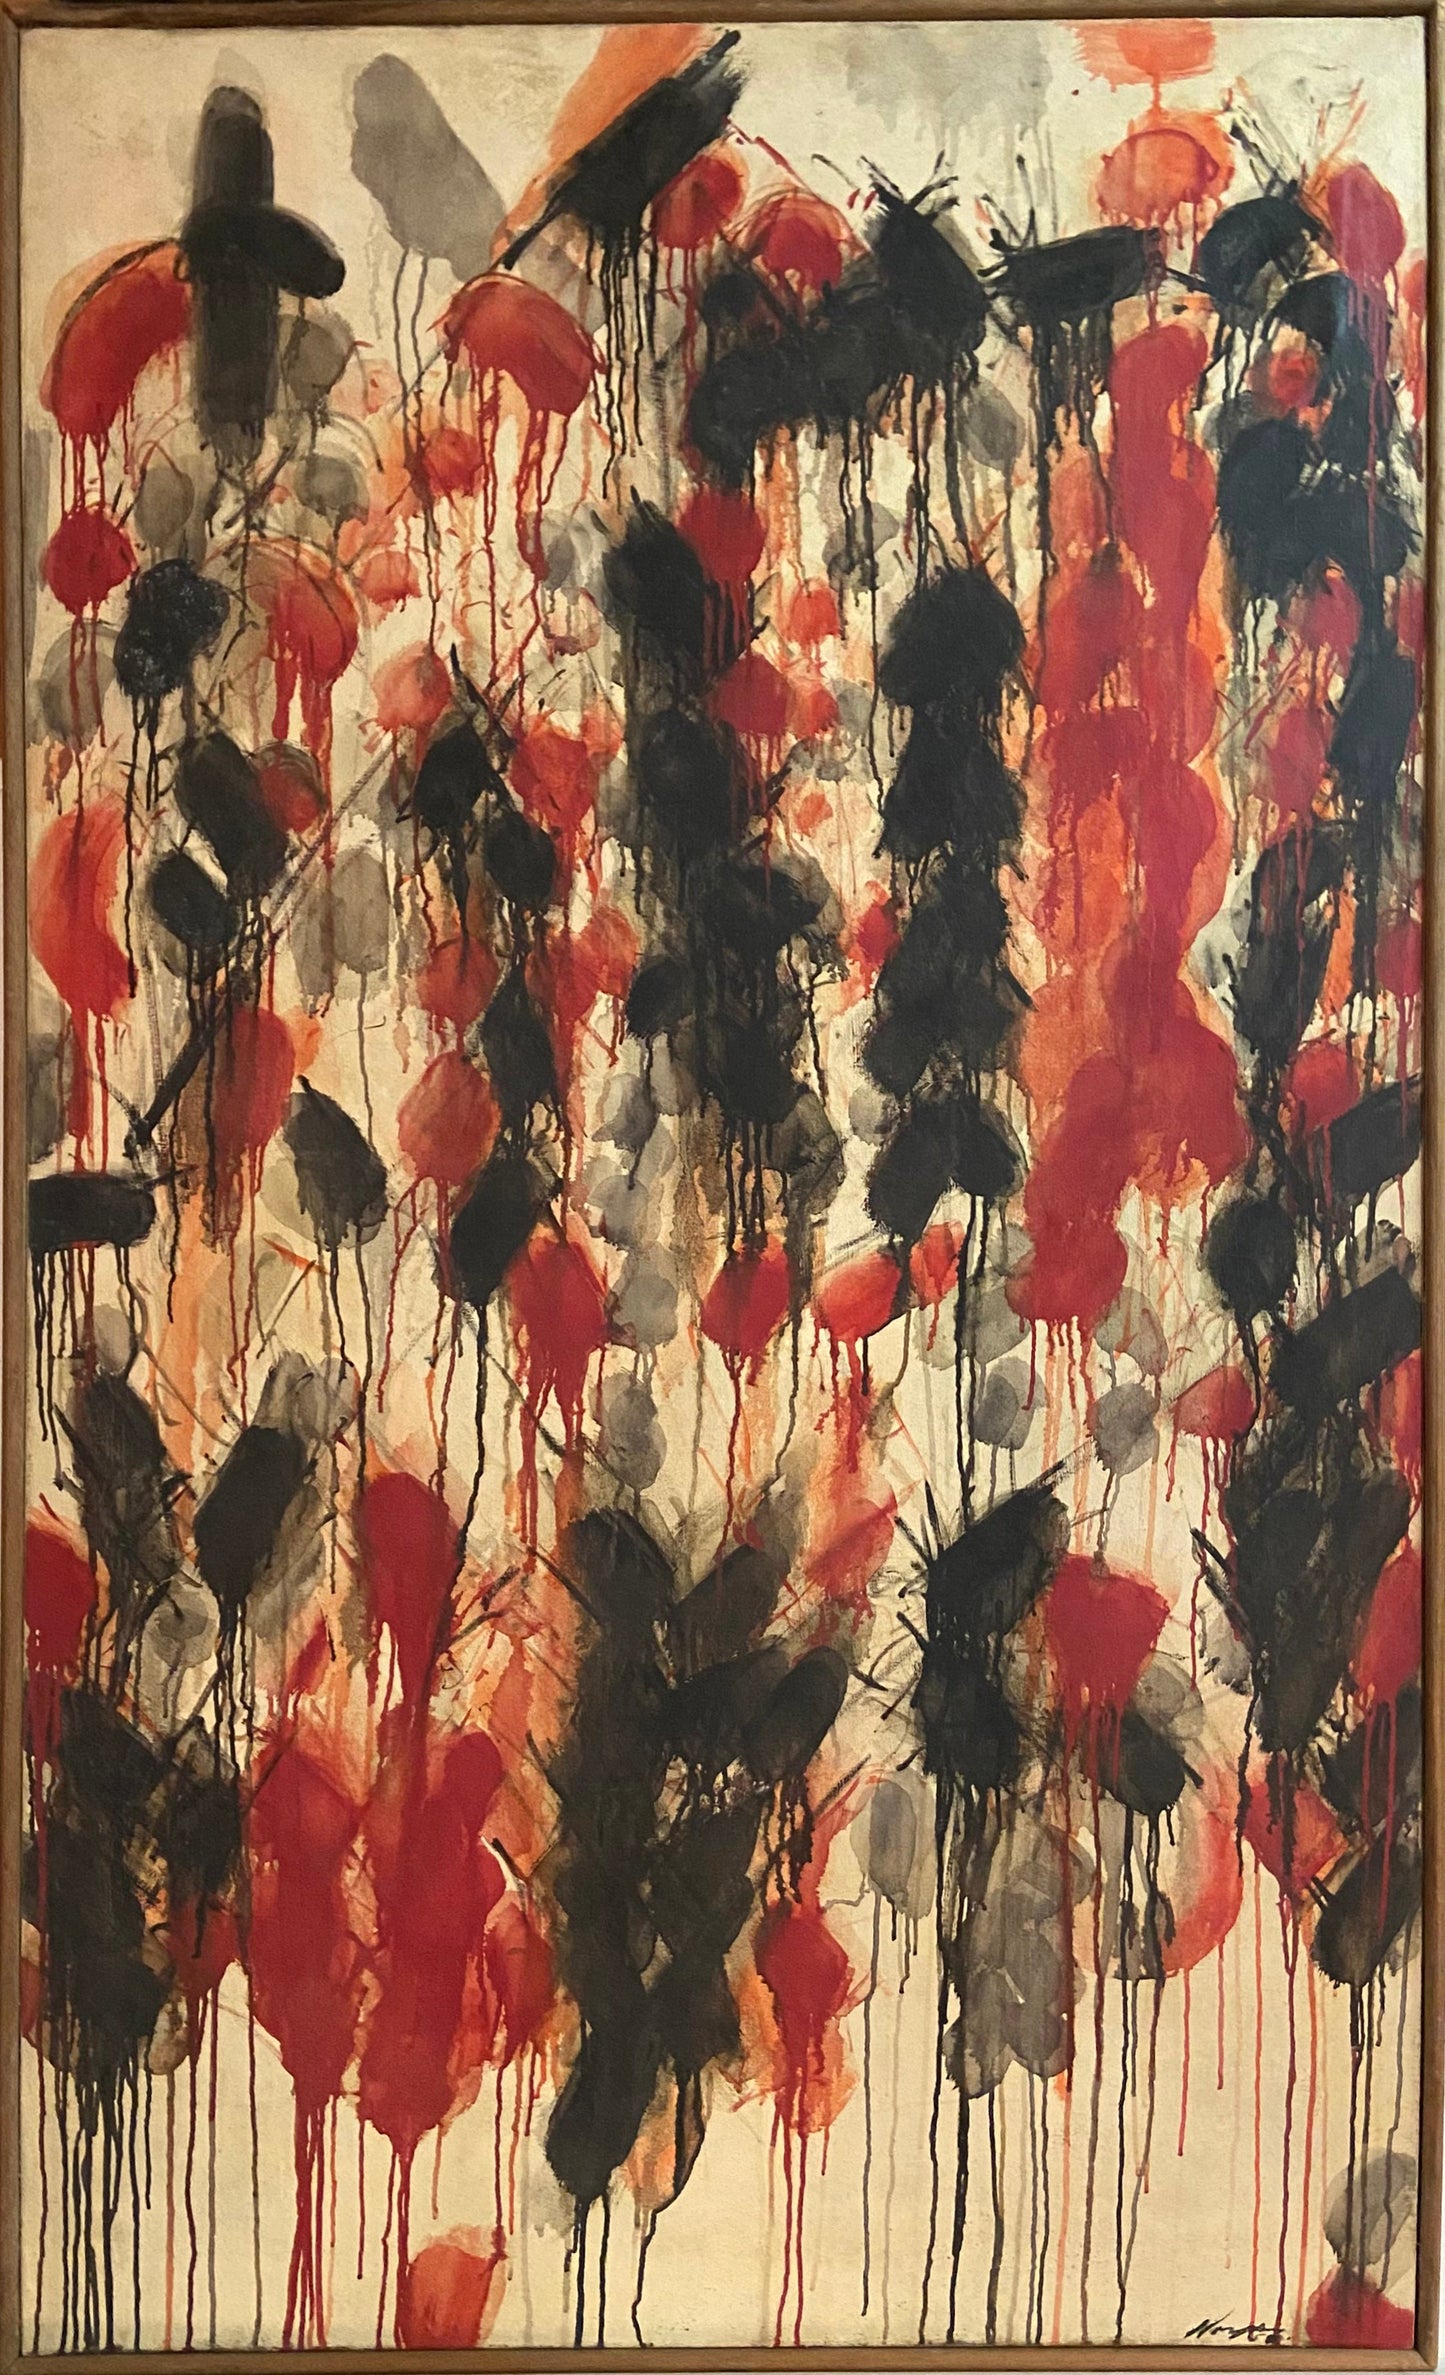 Norman Bluhm Oil Painting: Abstract Red and Black